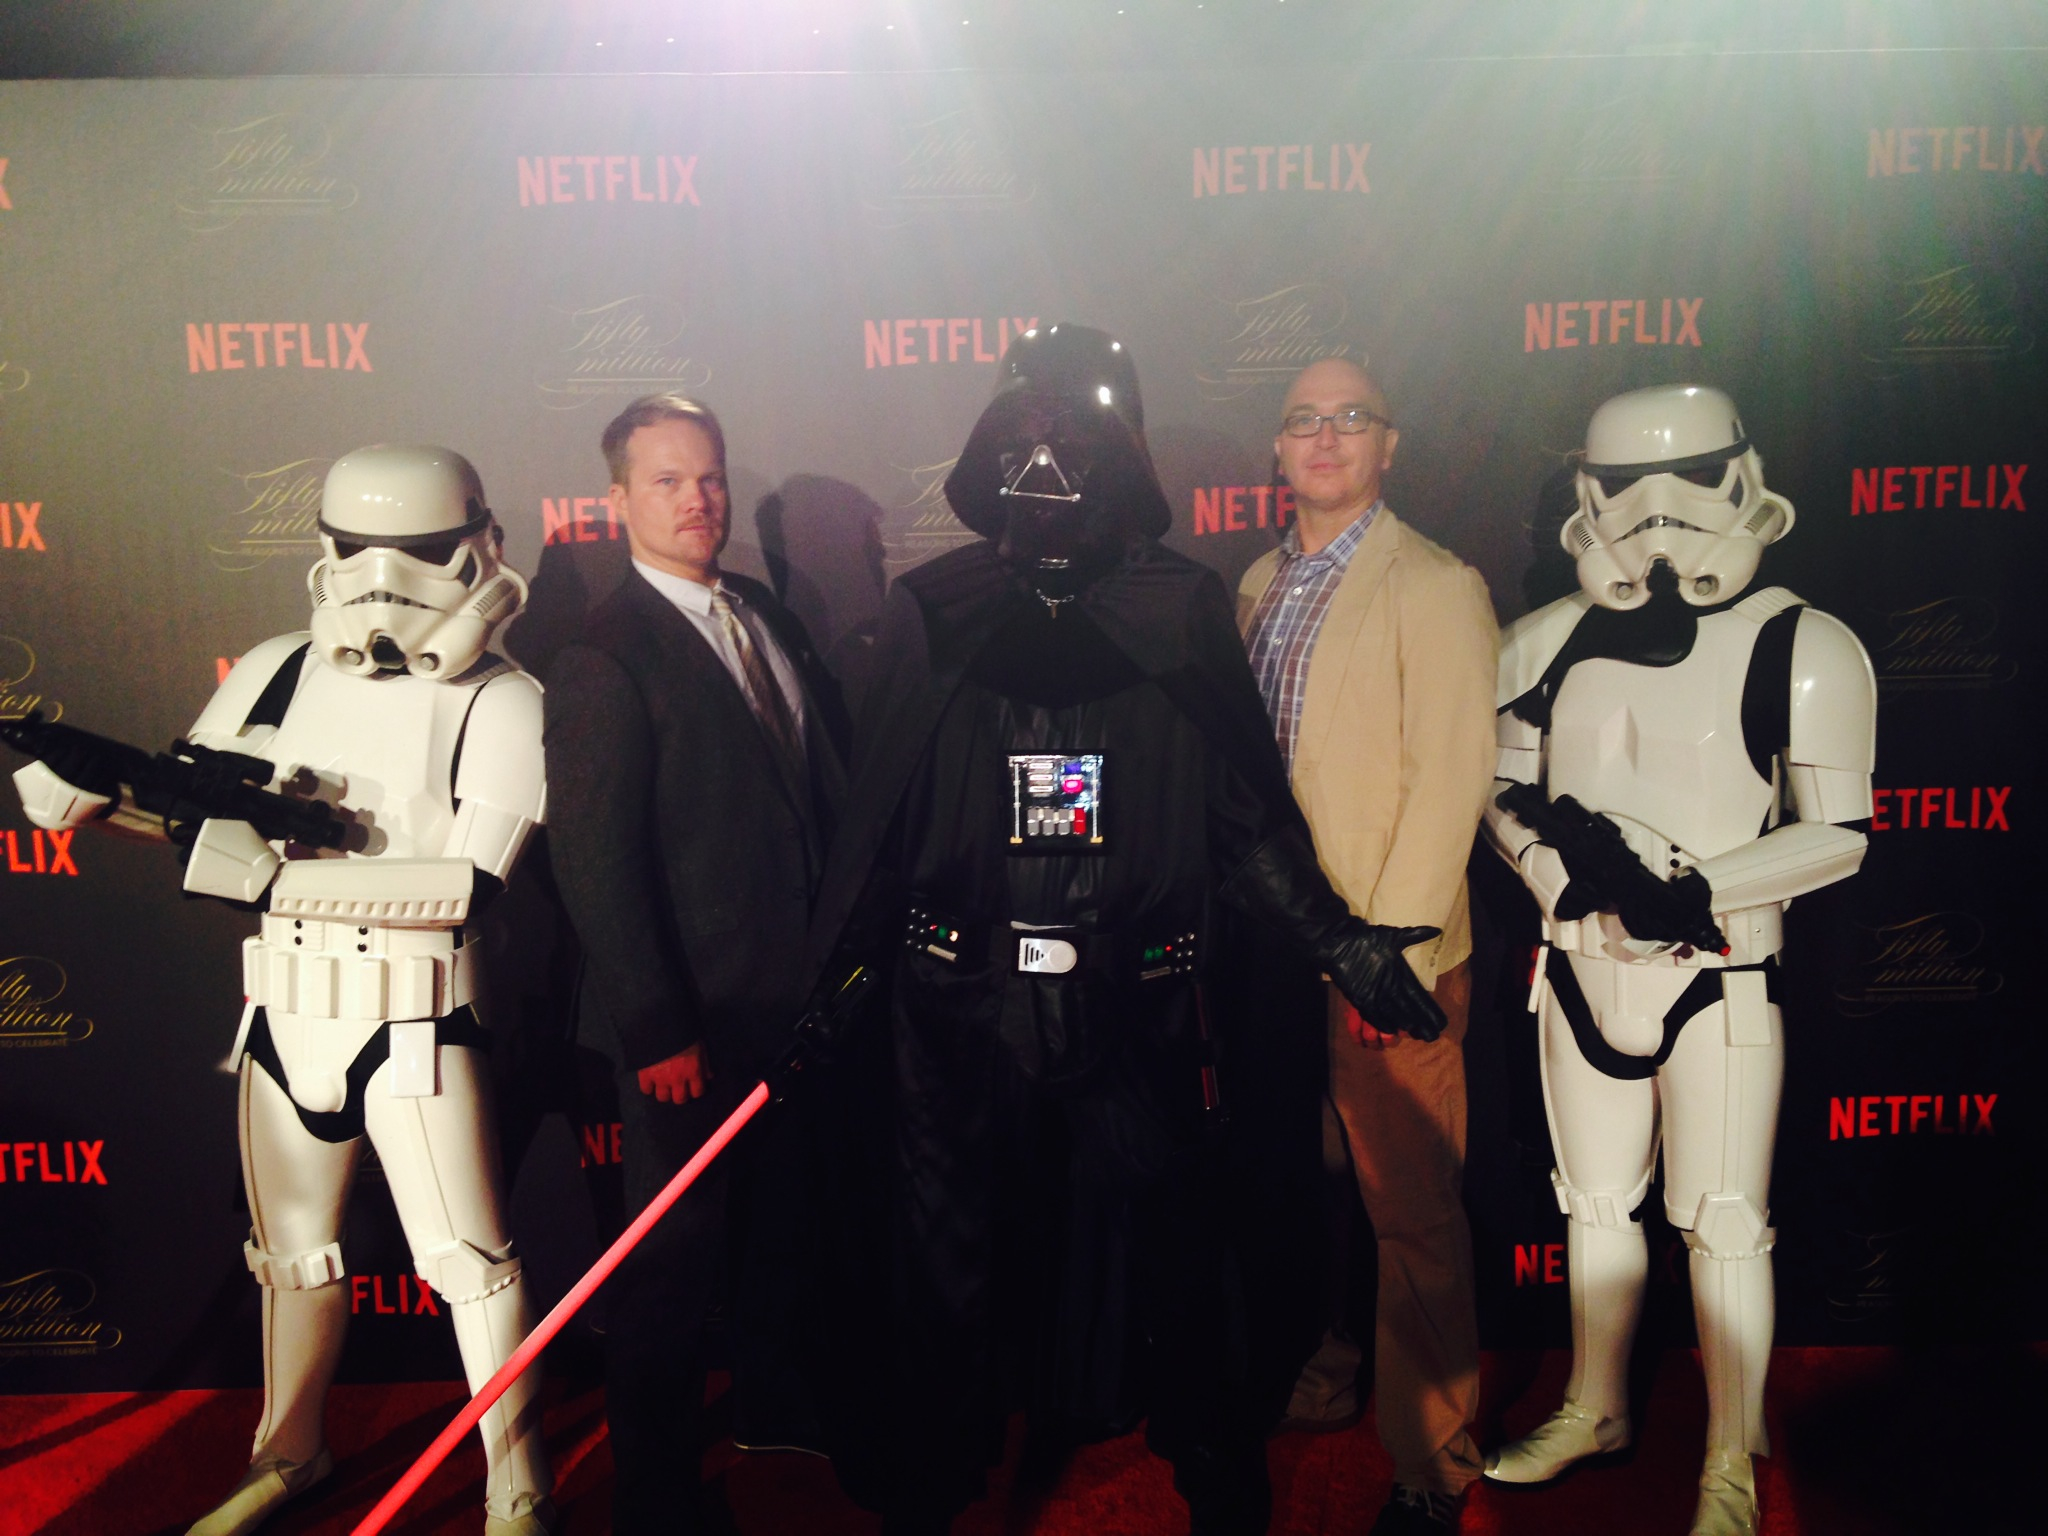 with Michael Baugh, Lord Vader, and Storm Troopers.